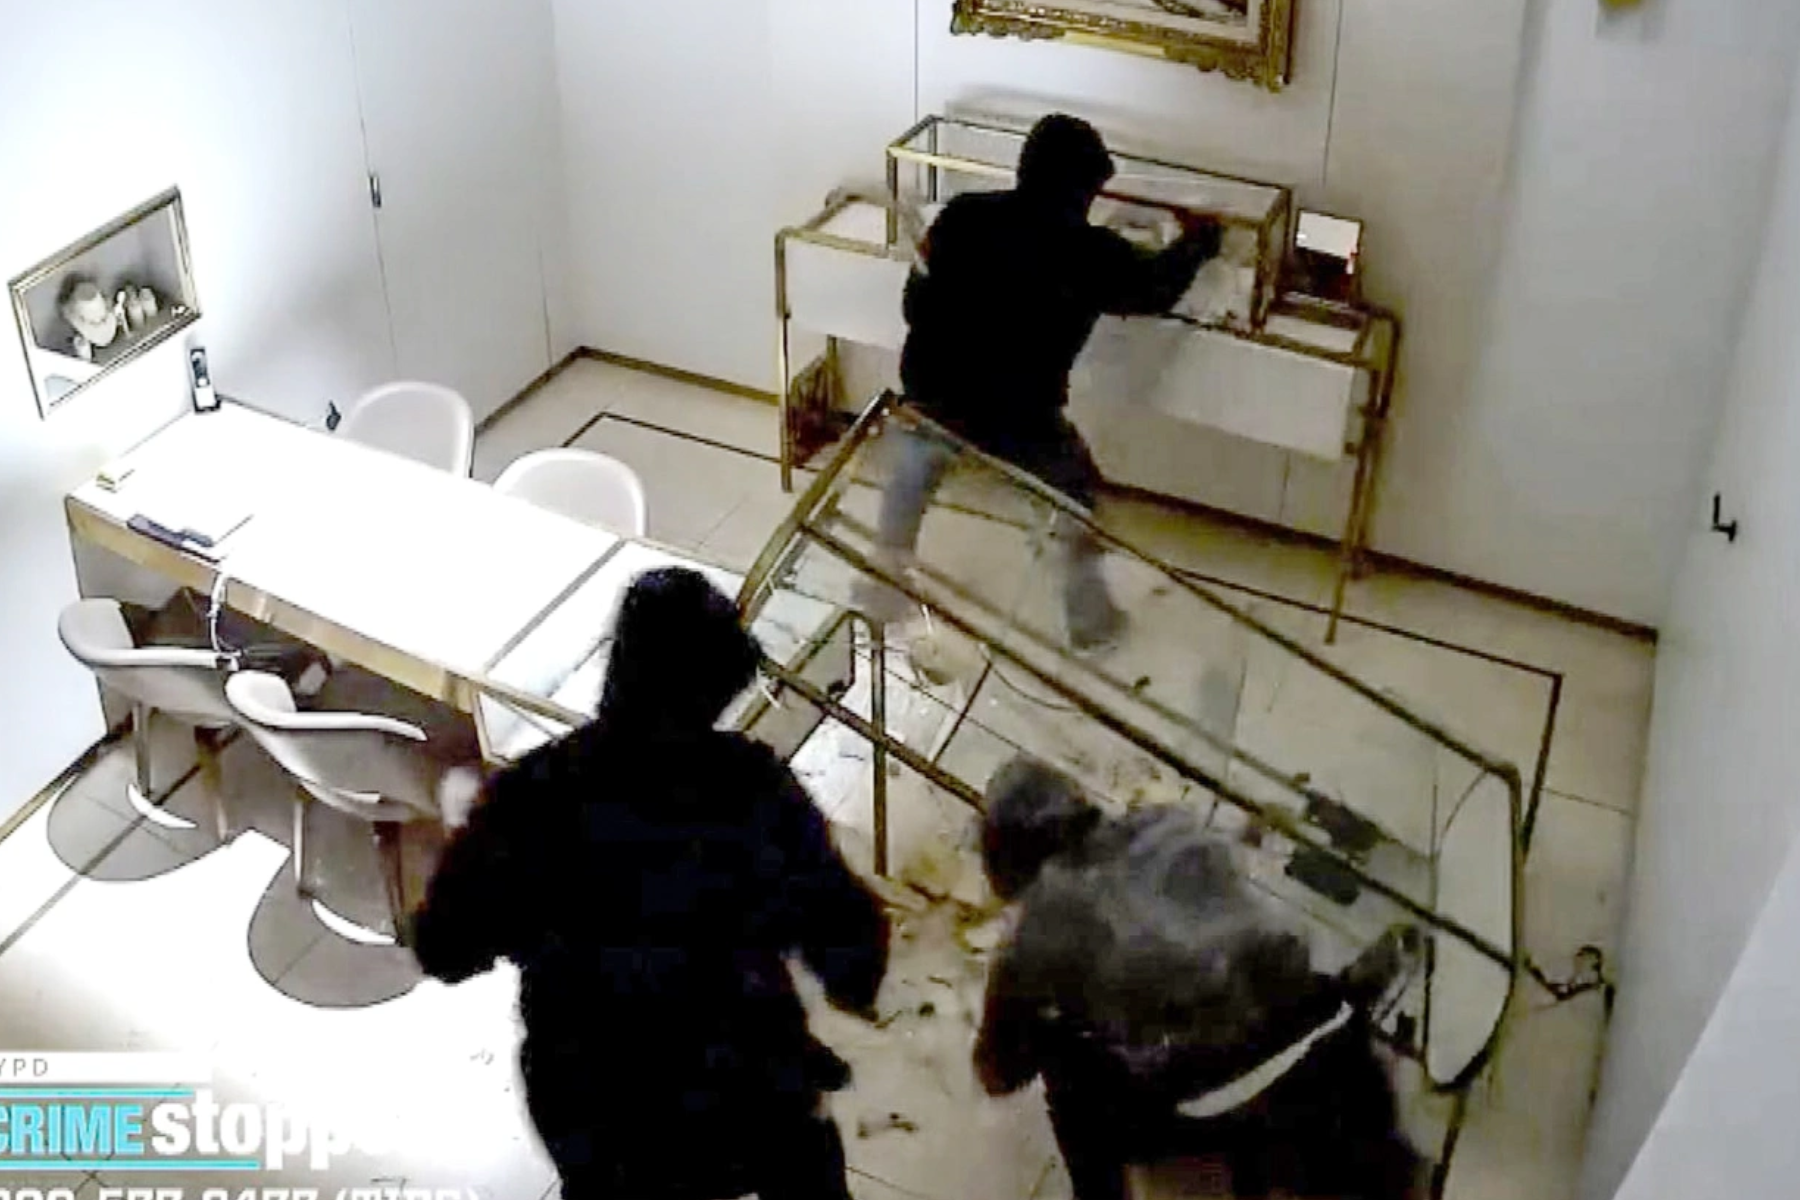 Video Shows $500K In High-end Jewelry Swiped In NYC Smash And Grab